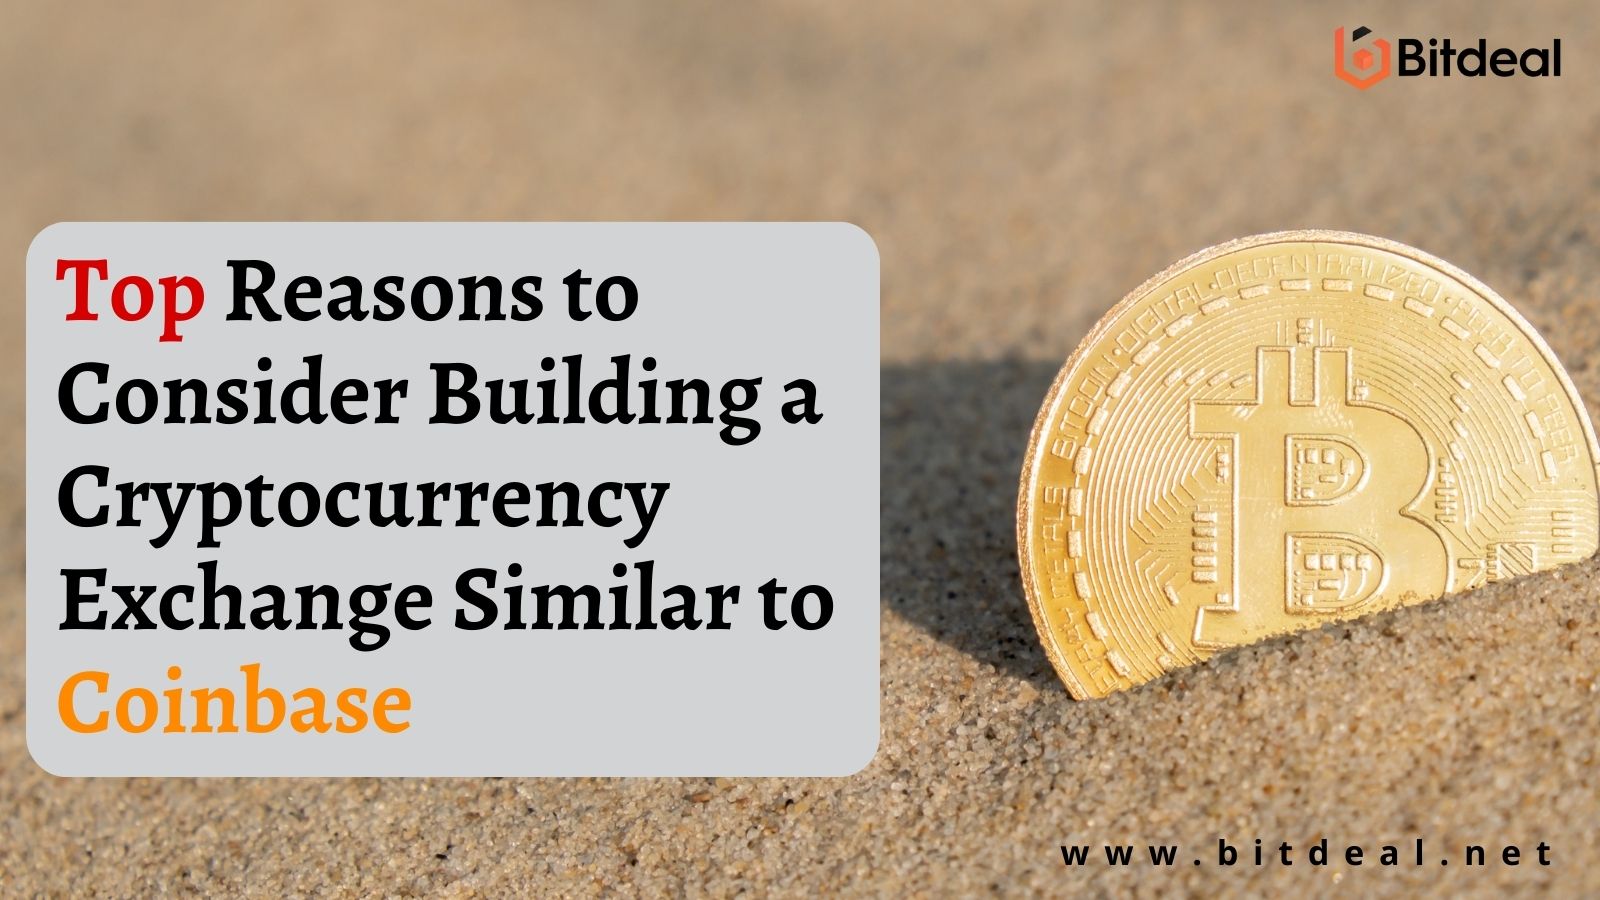 Top Reasons to Consider Building a Cryptocurrency Exchange Similar to Coinbase